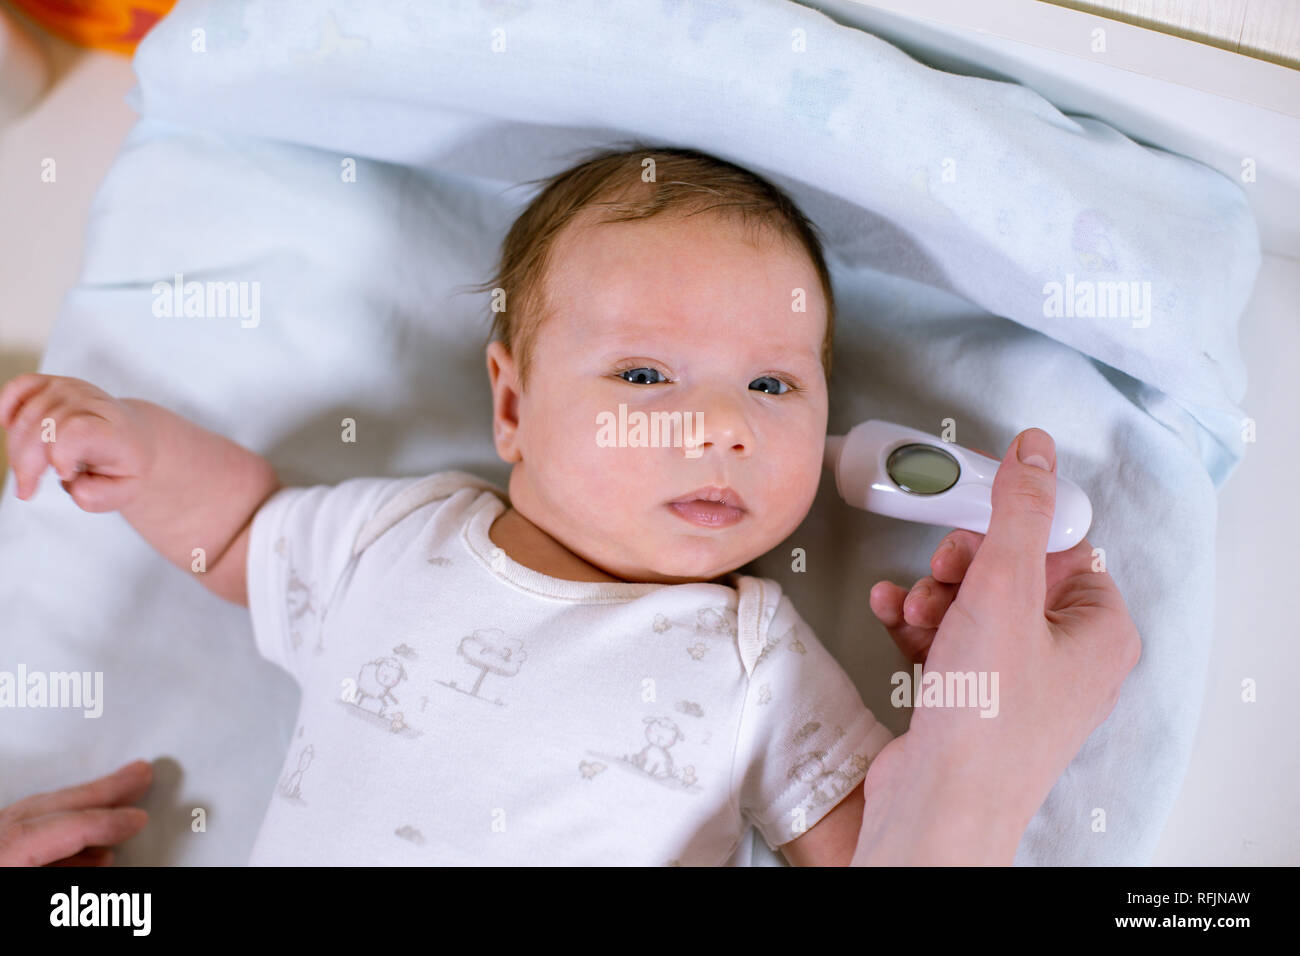 Measuring baby's temperature with contactless thermometer. Mom measures the baby's body temperature with a thermometer in the ear Stock Photo